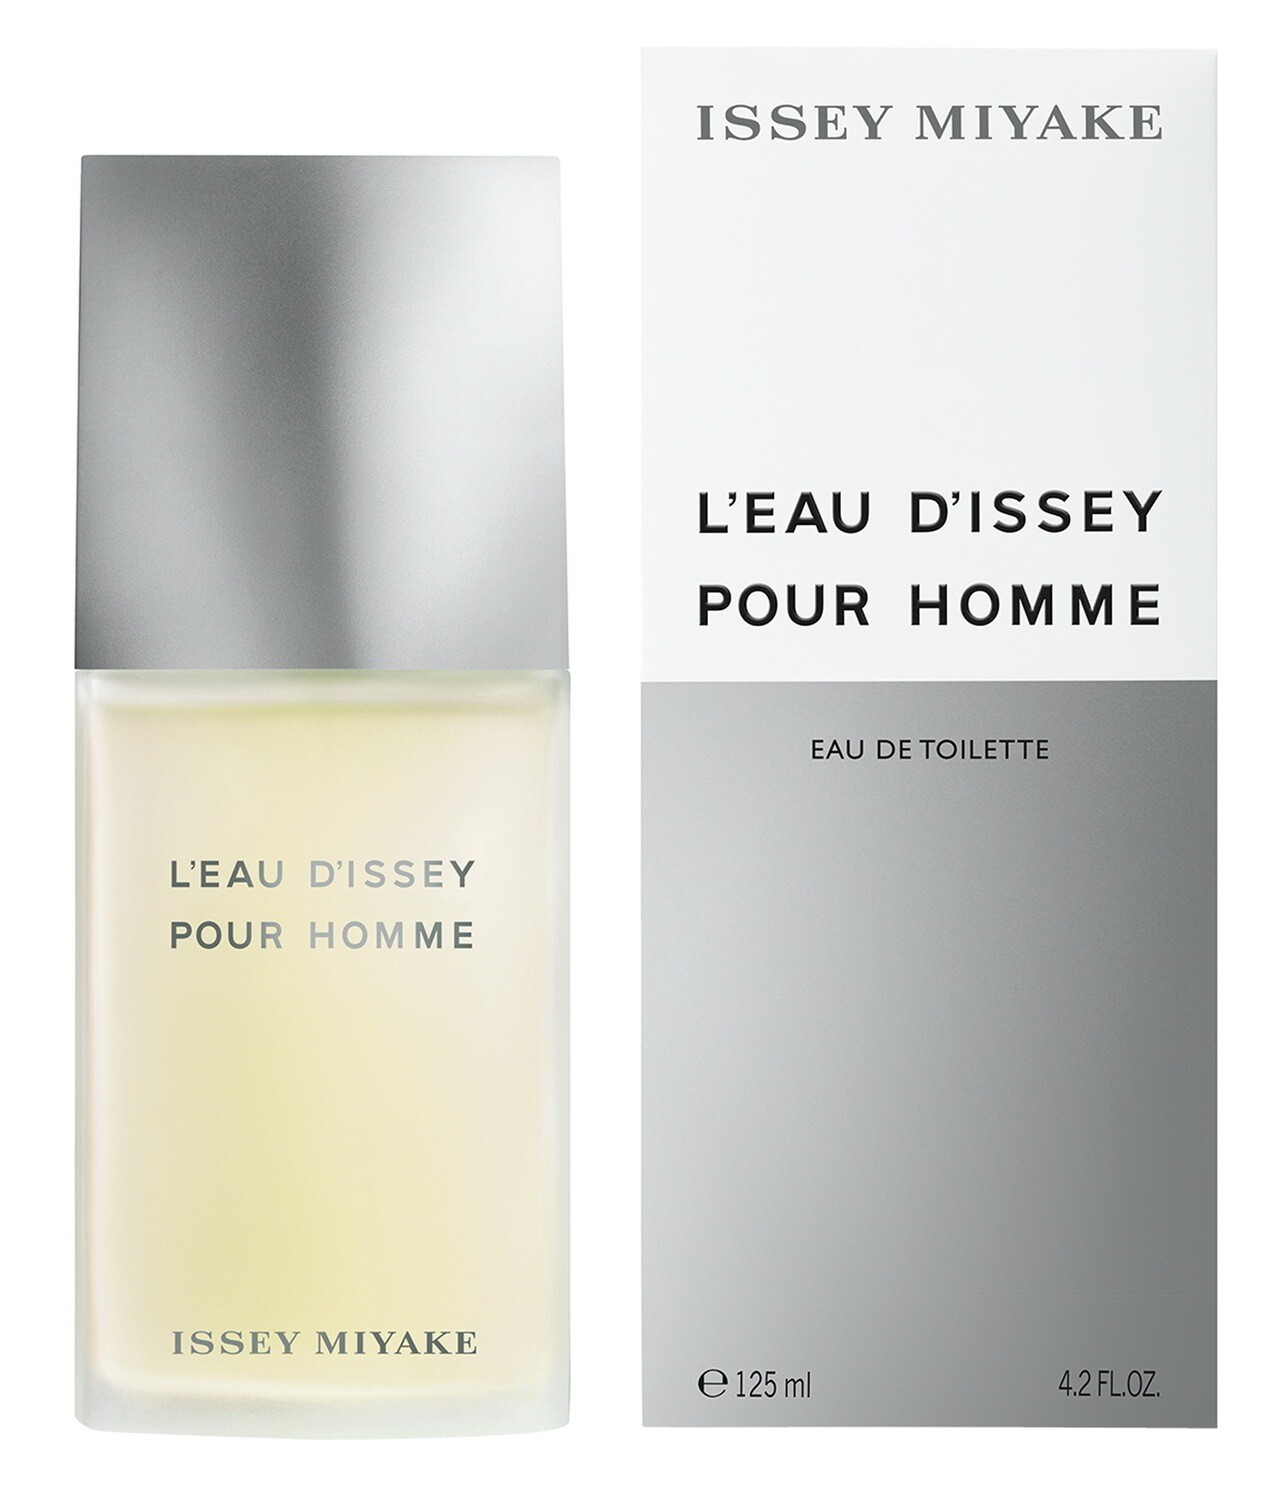 L'Eau d'Issey pour Homme - Issey Miyake